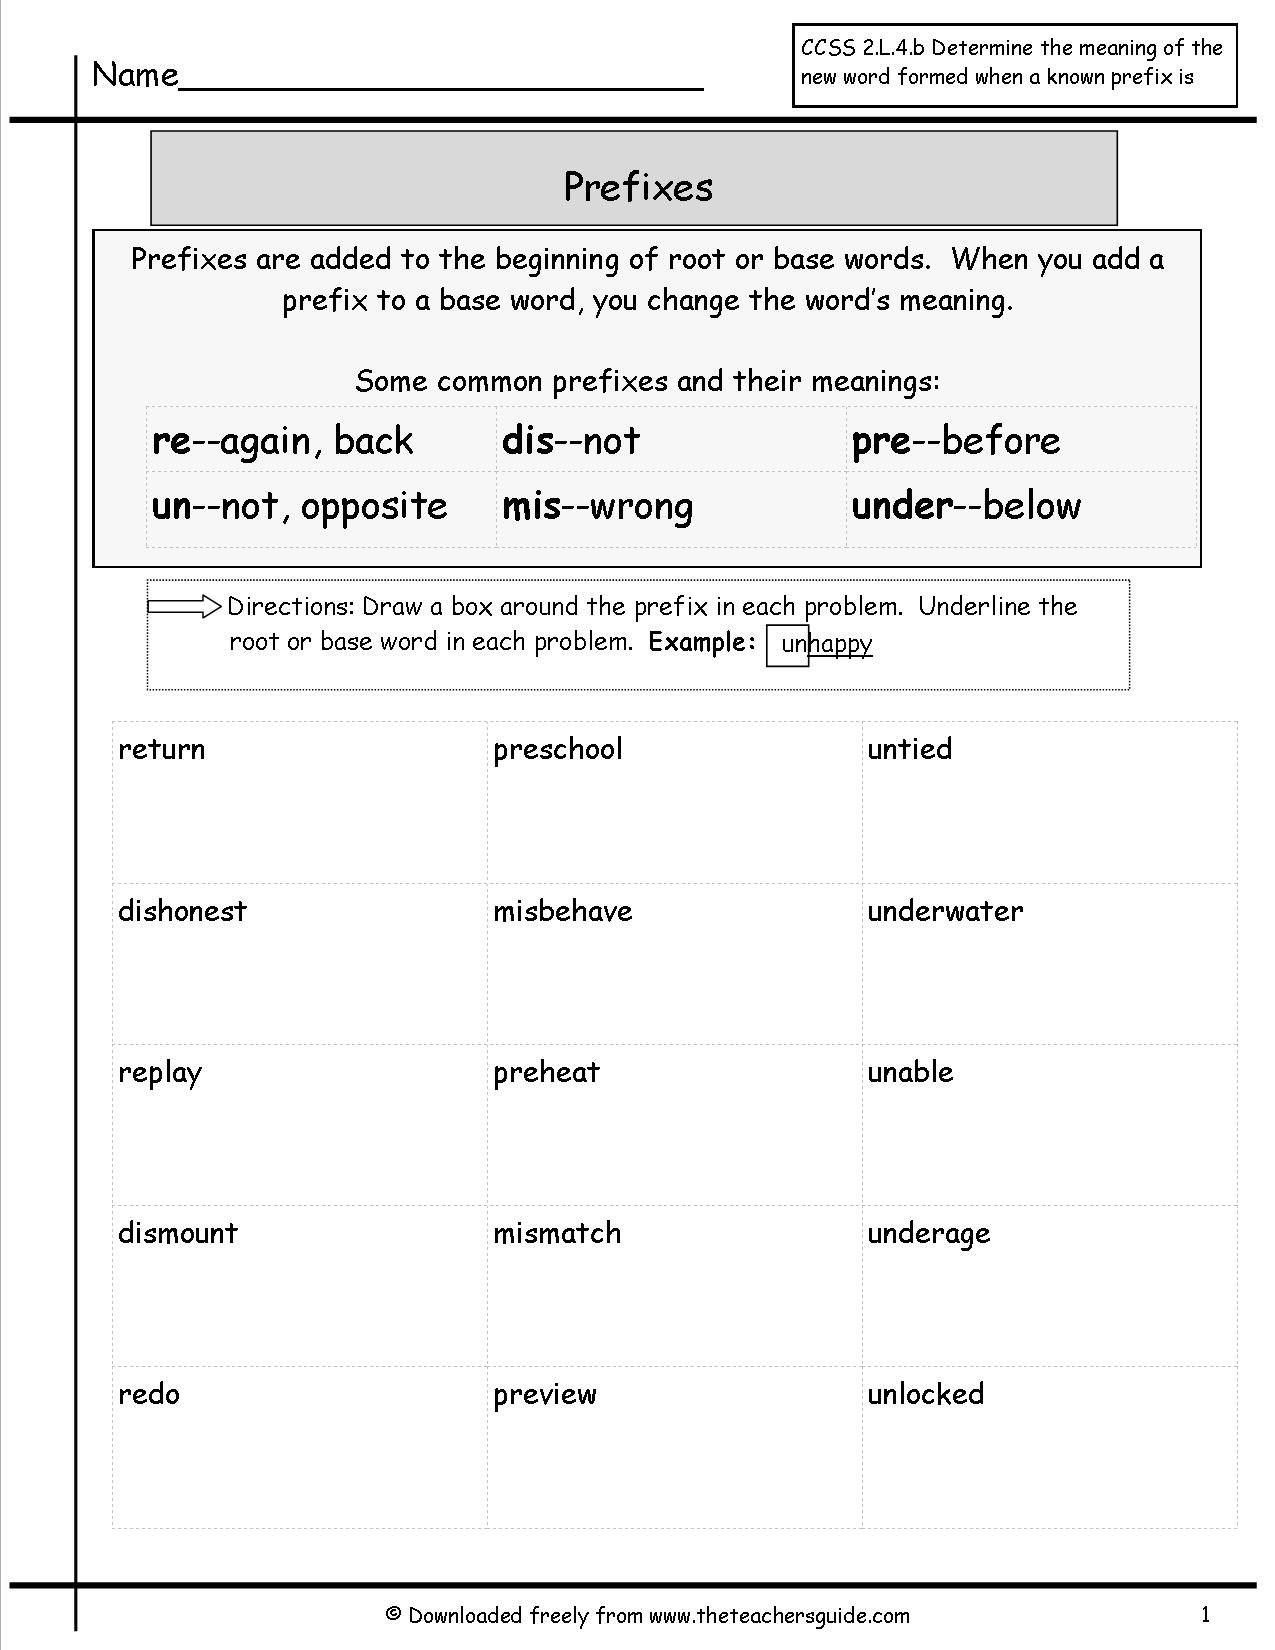 Free Prefixes And Suffixes Worksheets From The Teacher's Guide As Well As Greek And Latin Roots Worksheet Pdf